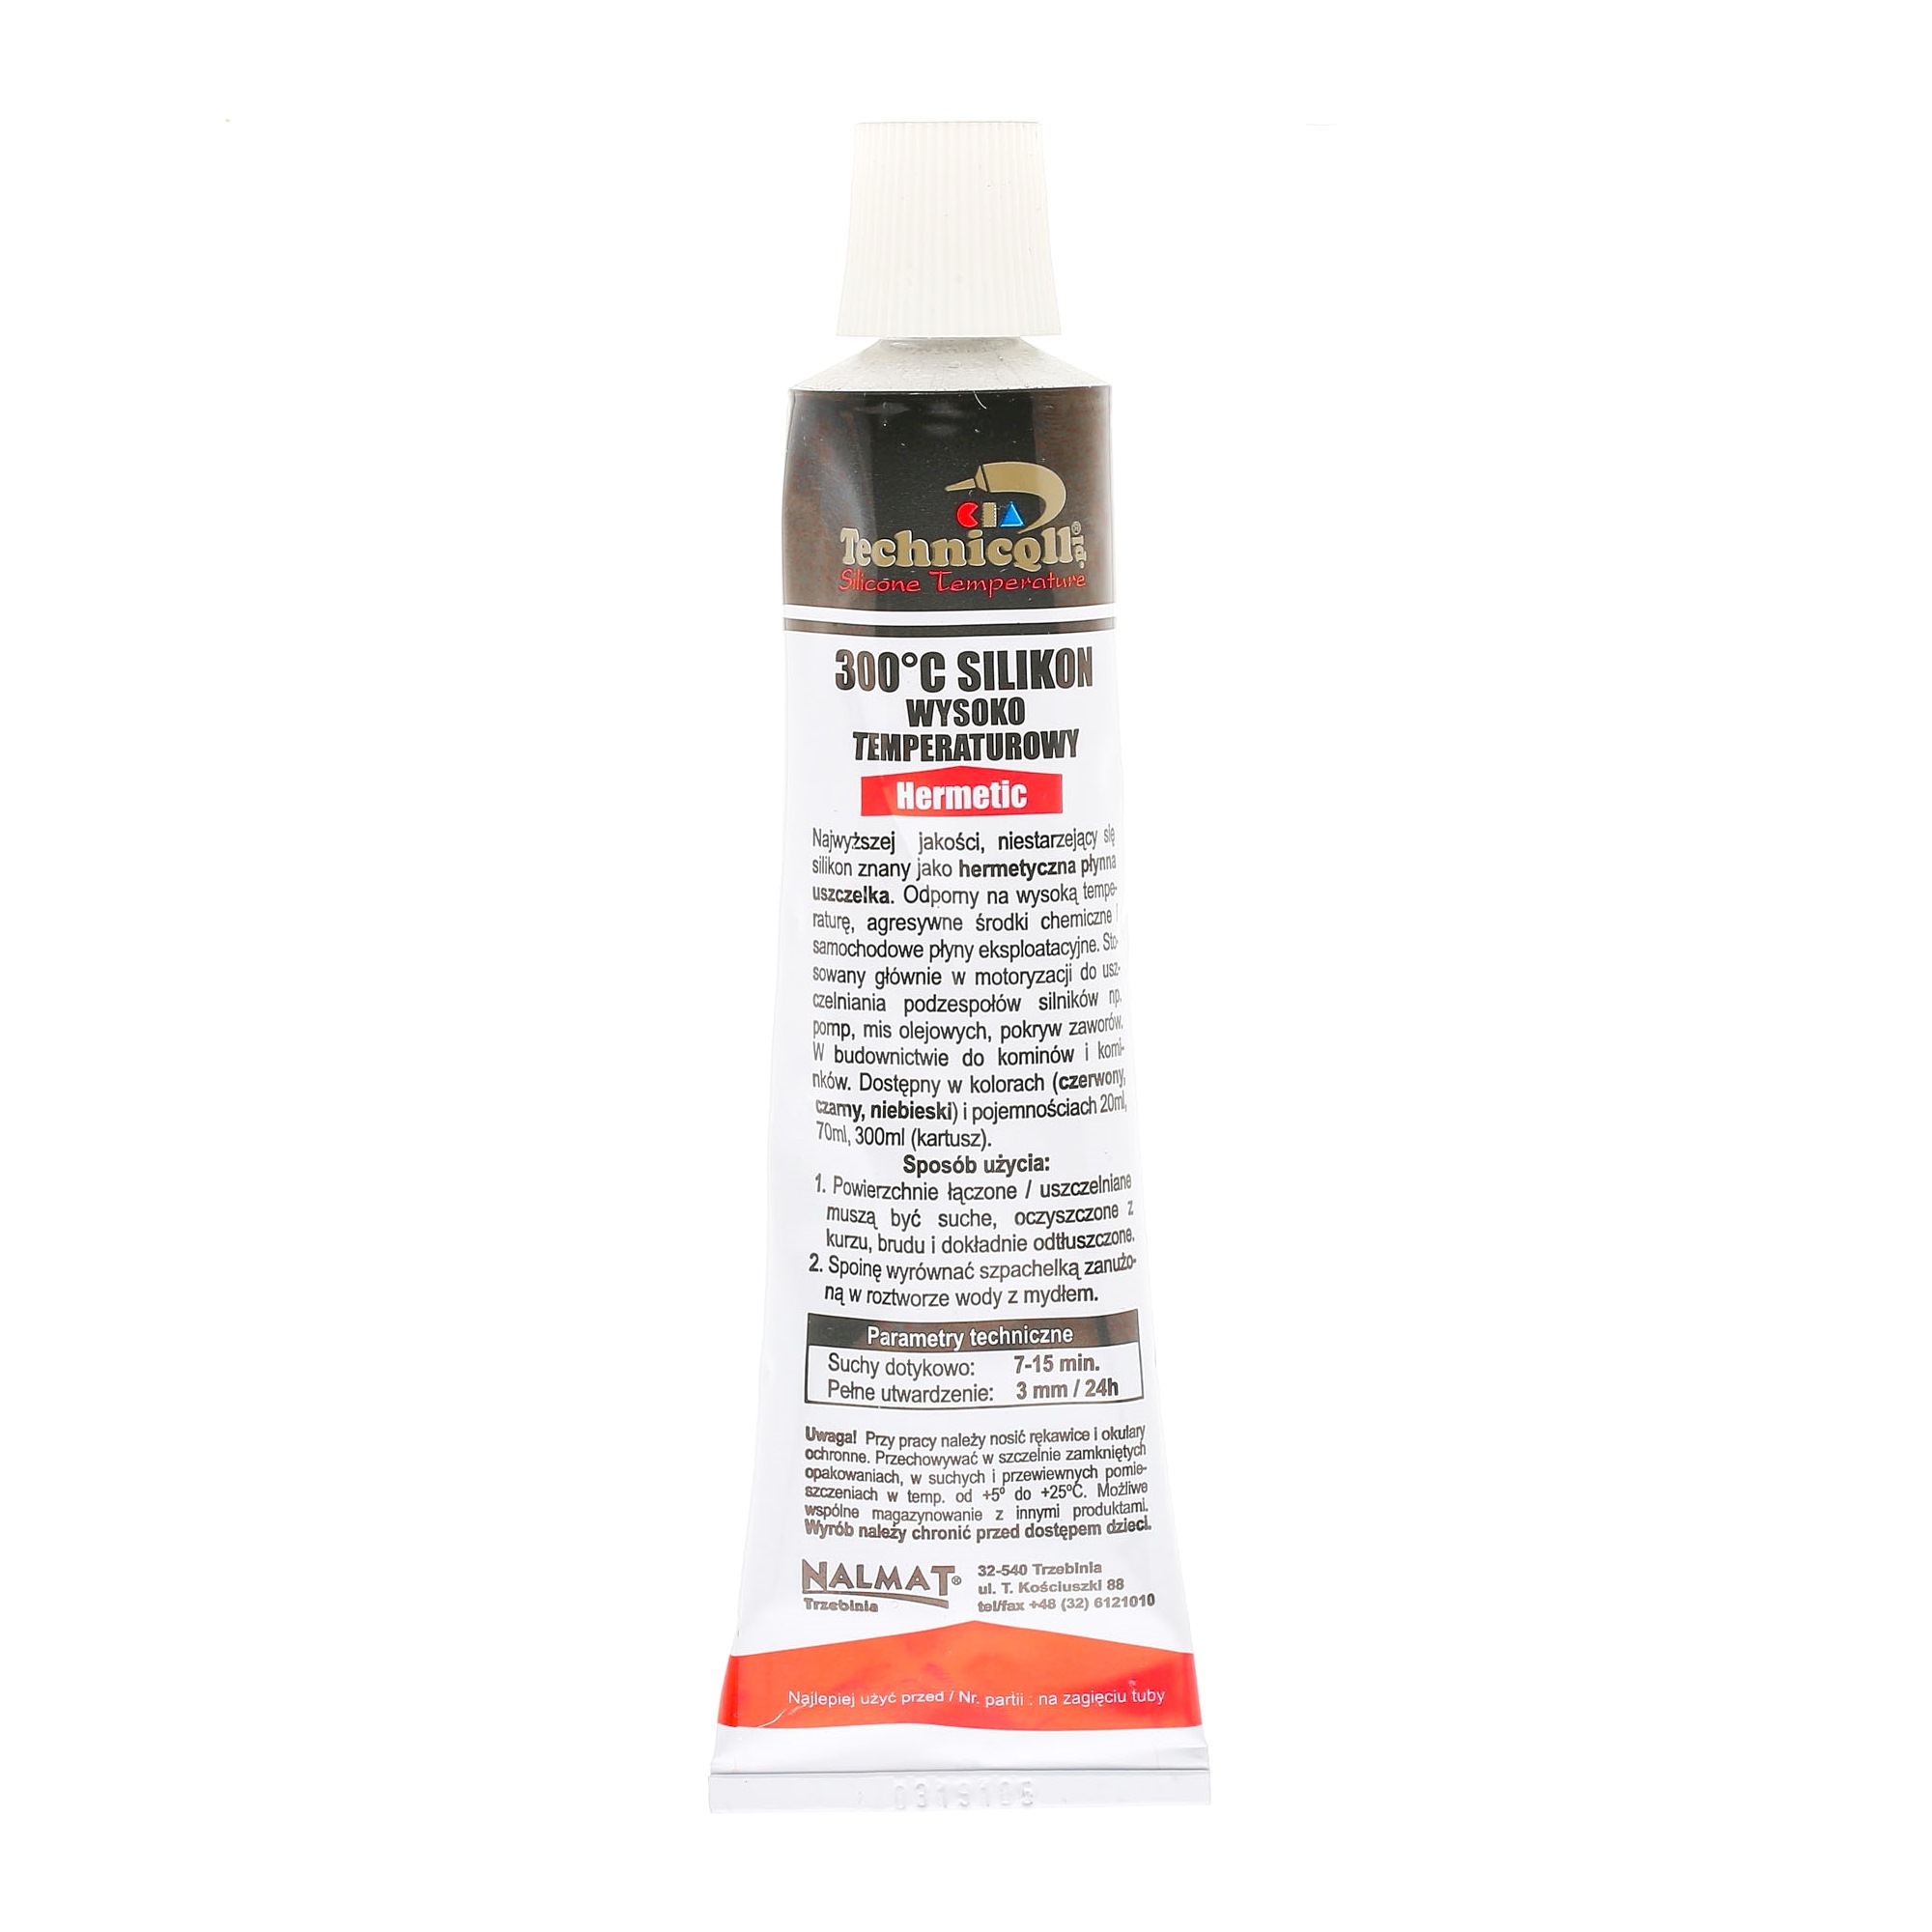 TECHNICQLL S280 Engine gasket sealant Capacity: 70ml, Contains silicate, Heat-resistant, red